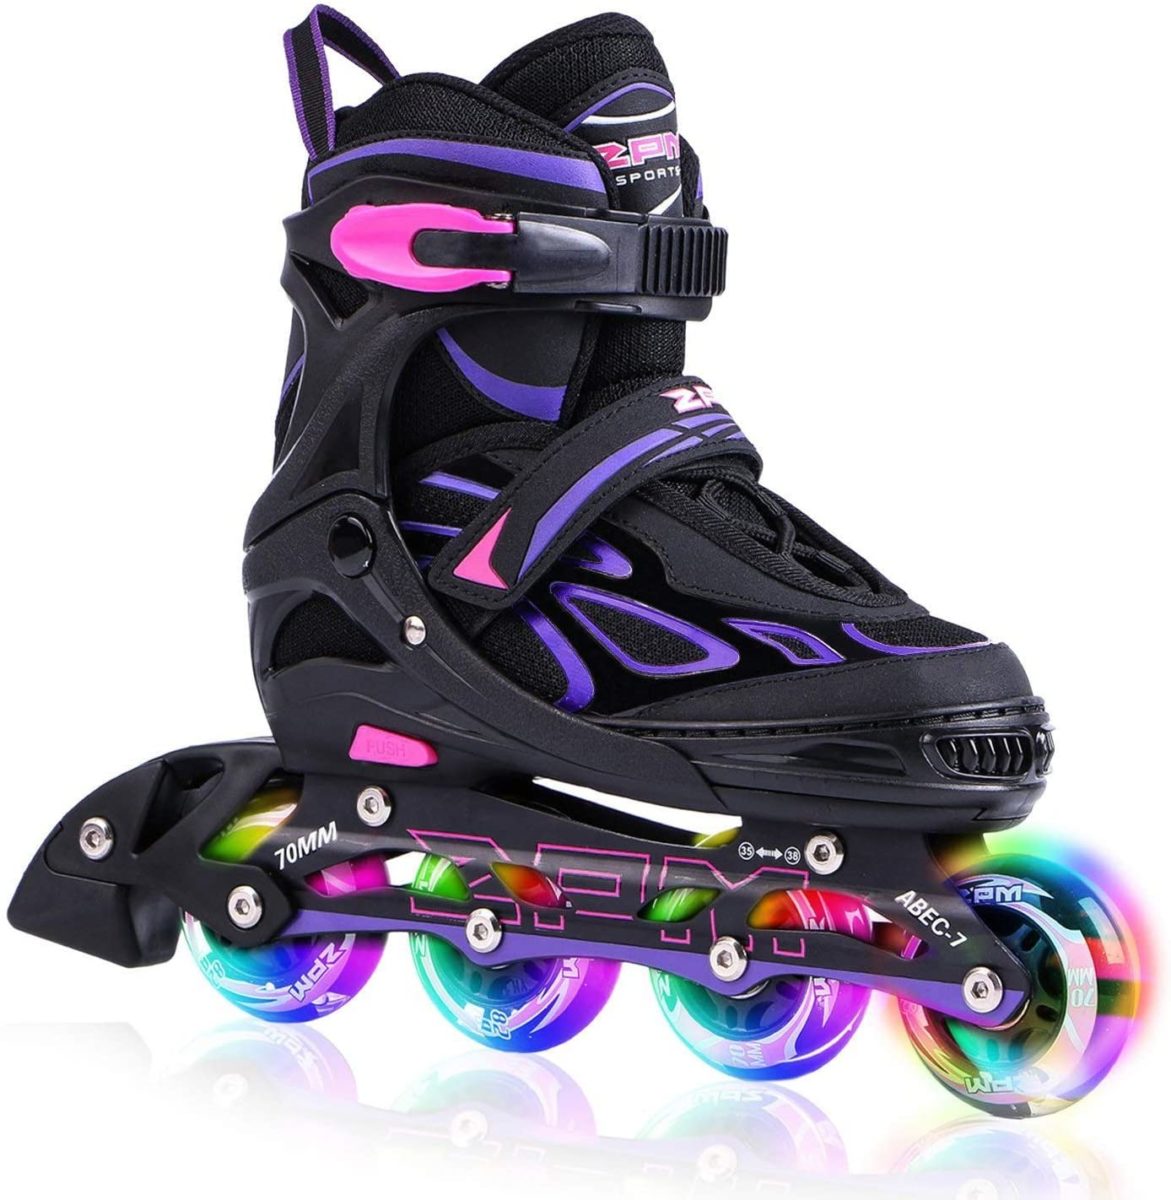 durable roller blades for kids who want to fly